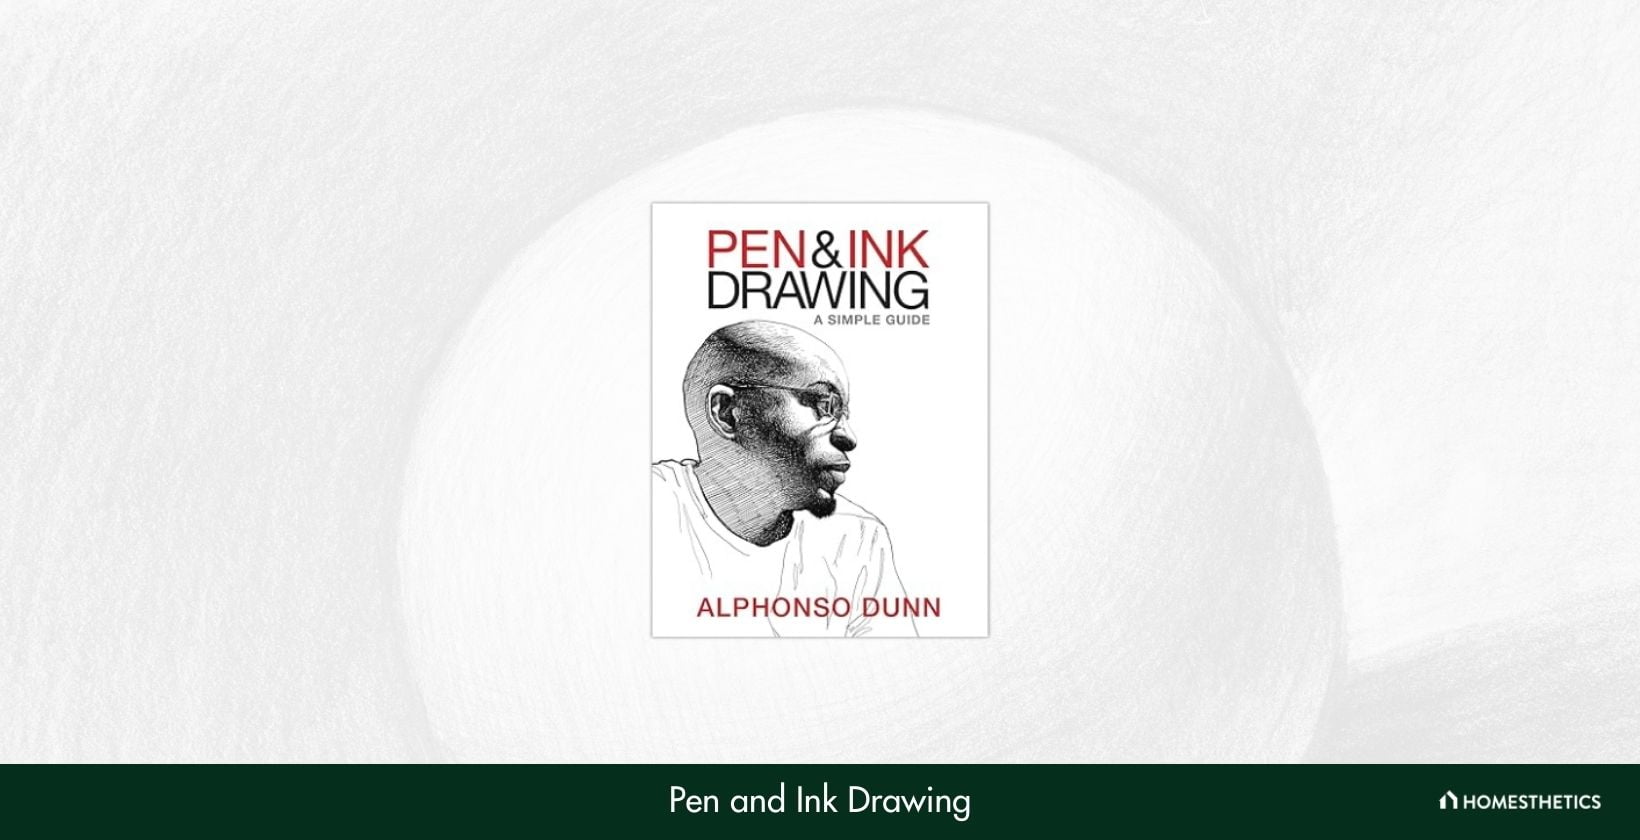 Pen and Ink Drawing A Simple Guide by Alphonso Dunn